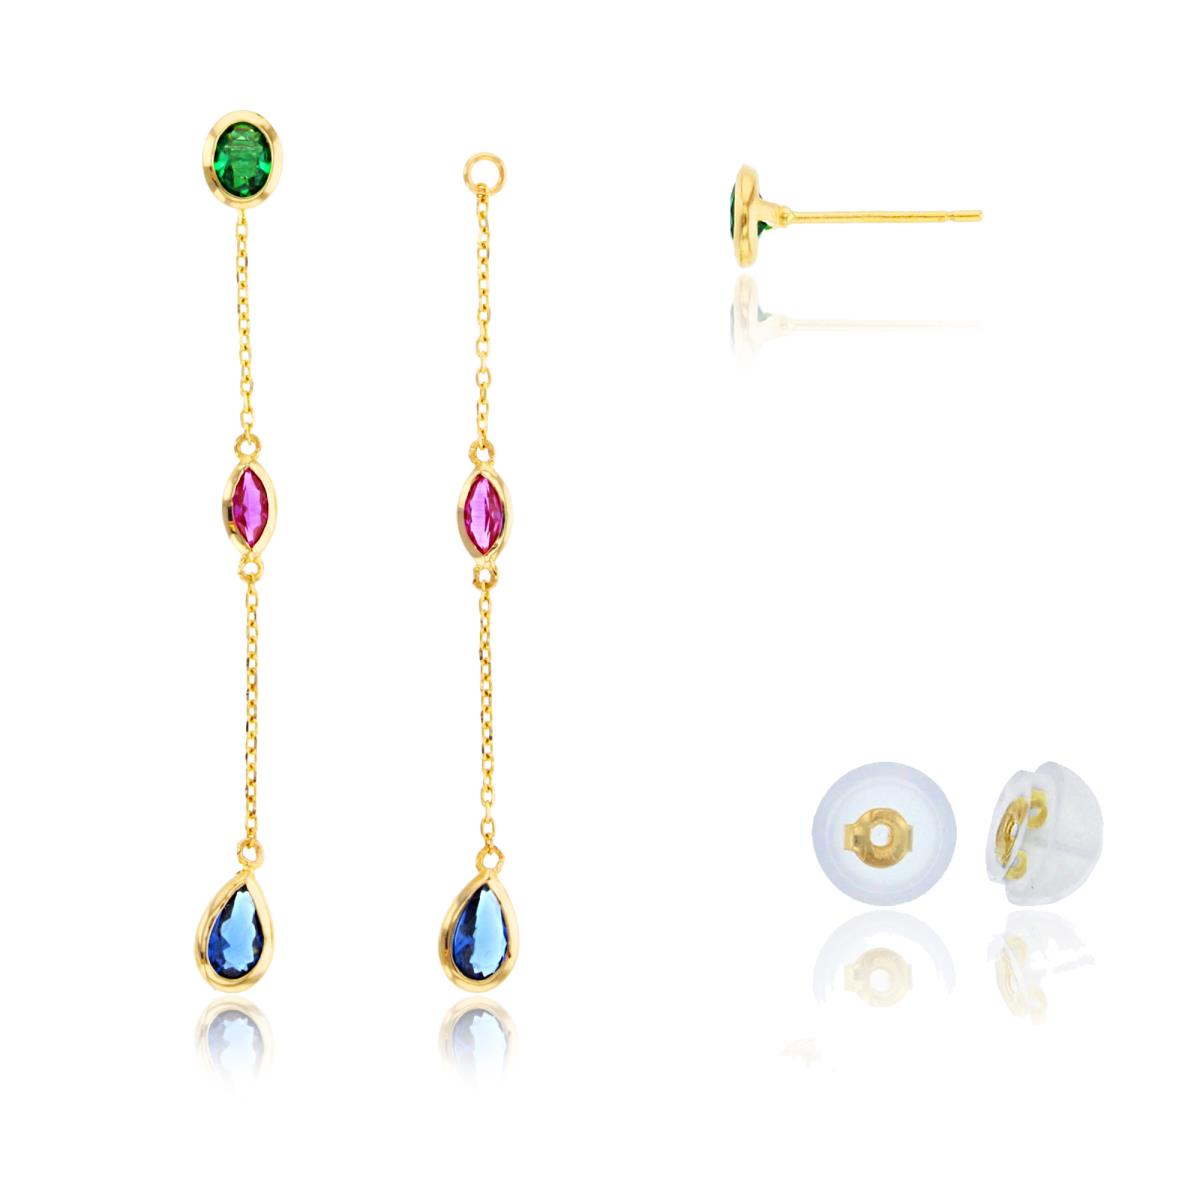 10K Yellow Gold Multishape Multicolor CZ Bezel Studs on Linked Dangling Earrings with Silicon Backs